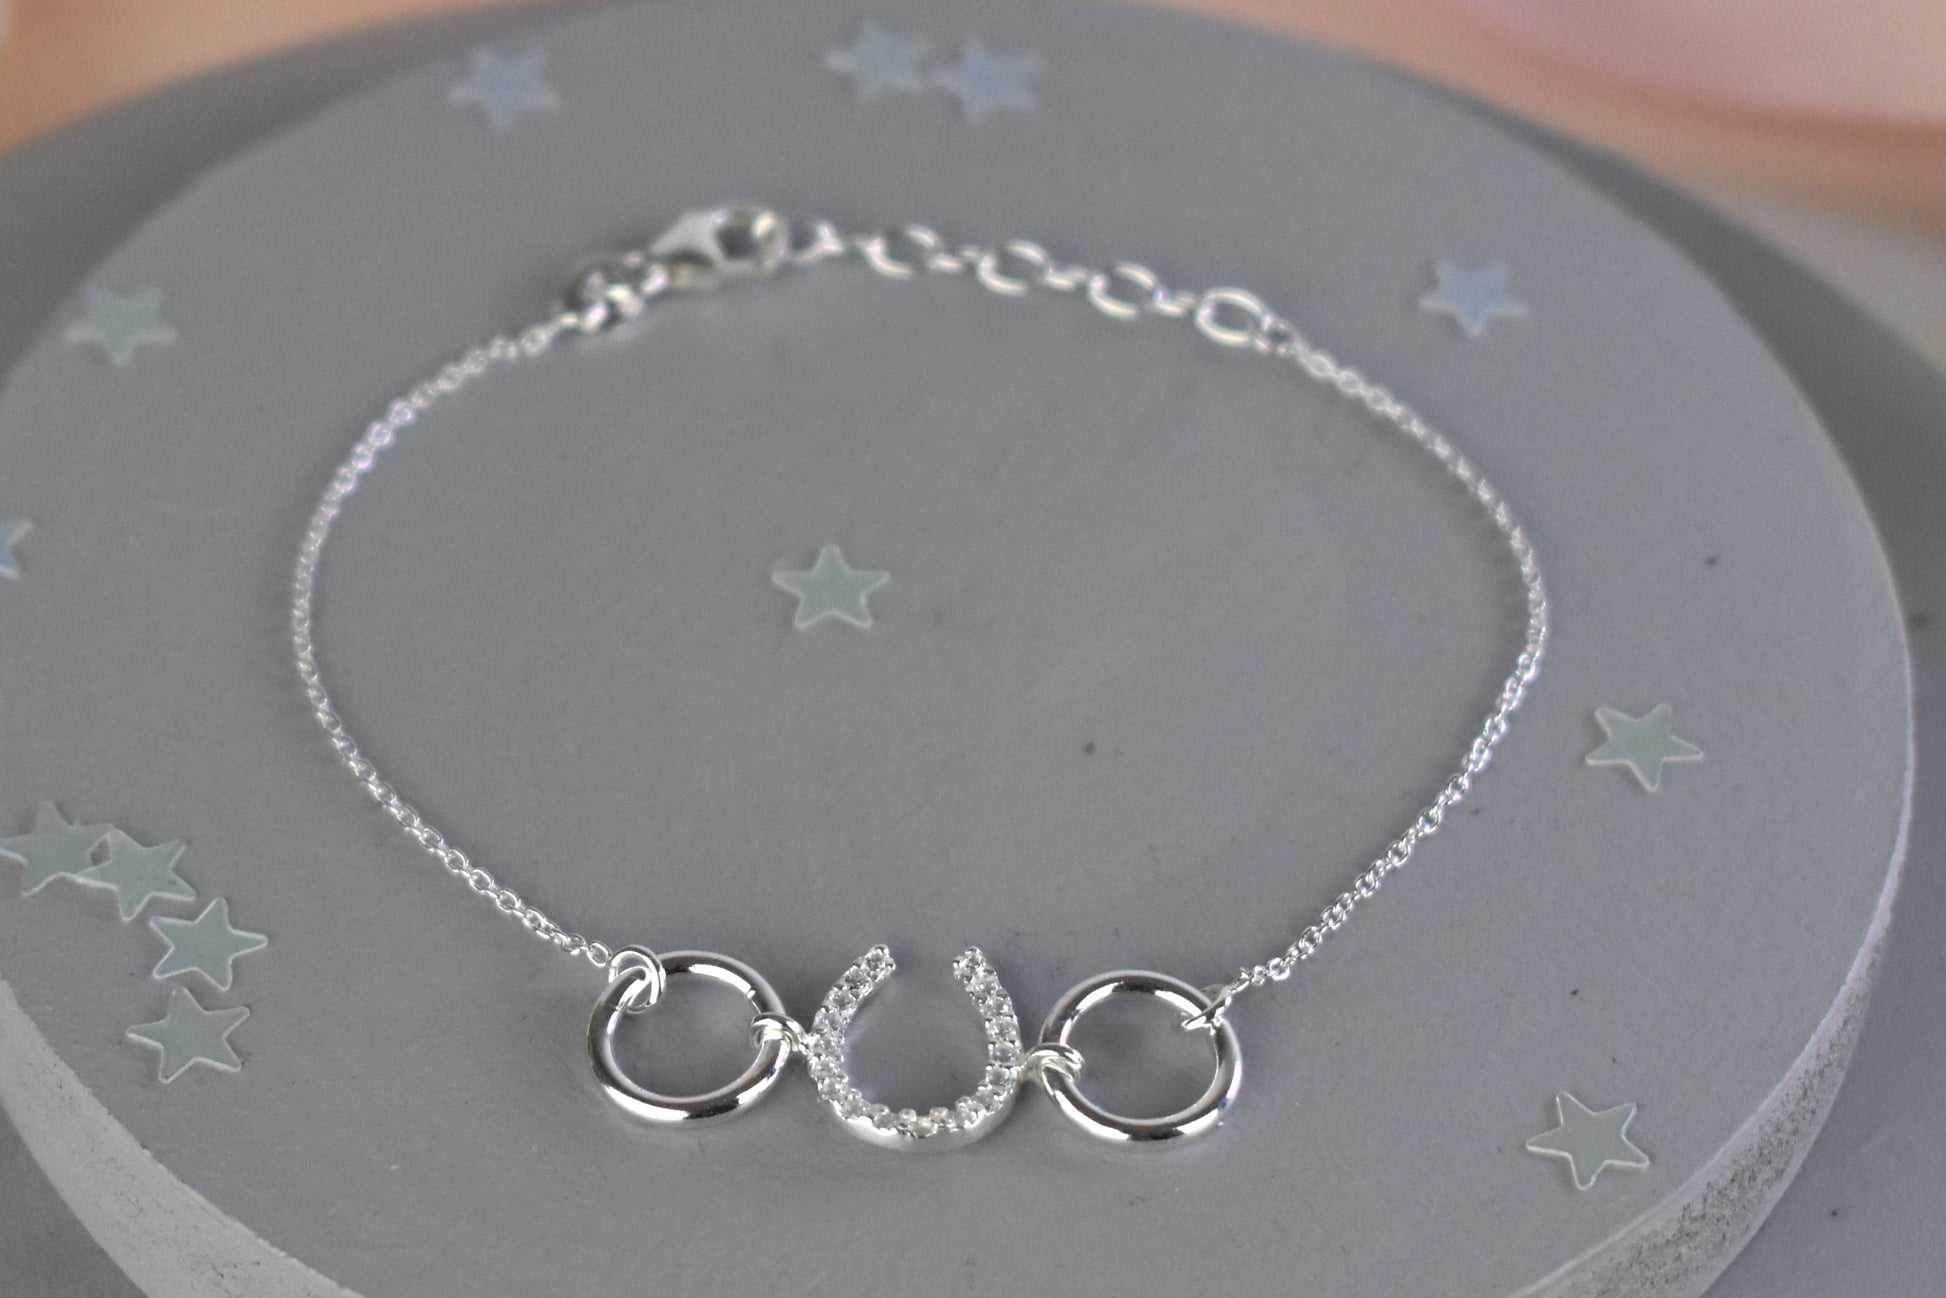 Sterling silver bracelet with cubic zircona horseshoe link. Adjustable by 1 inch extender.